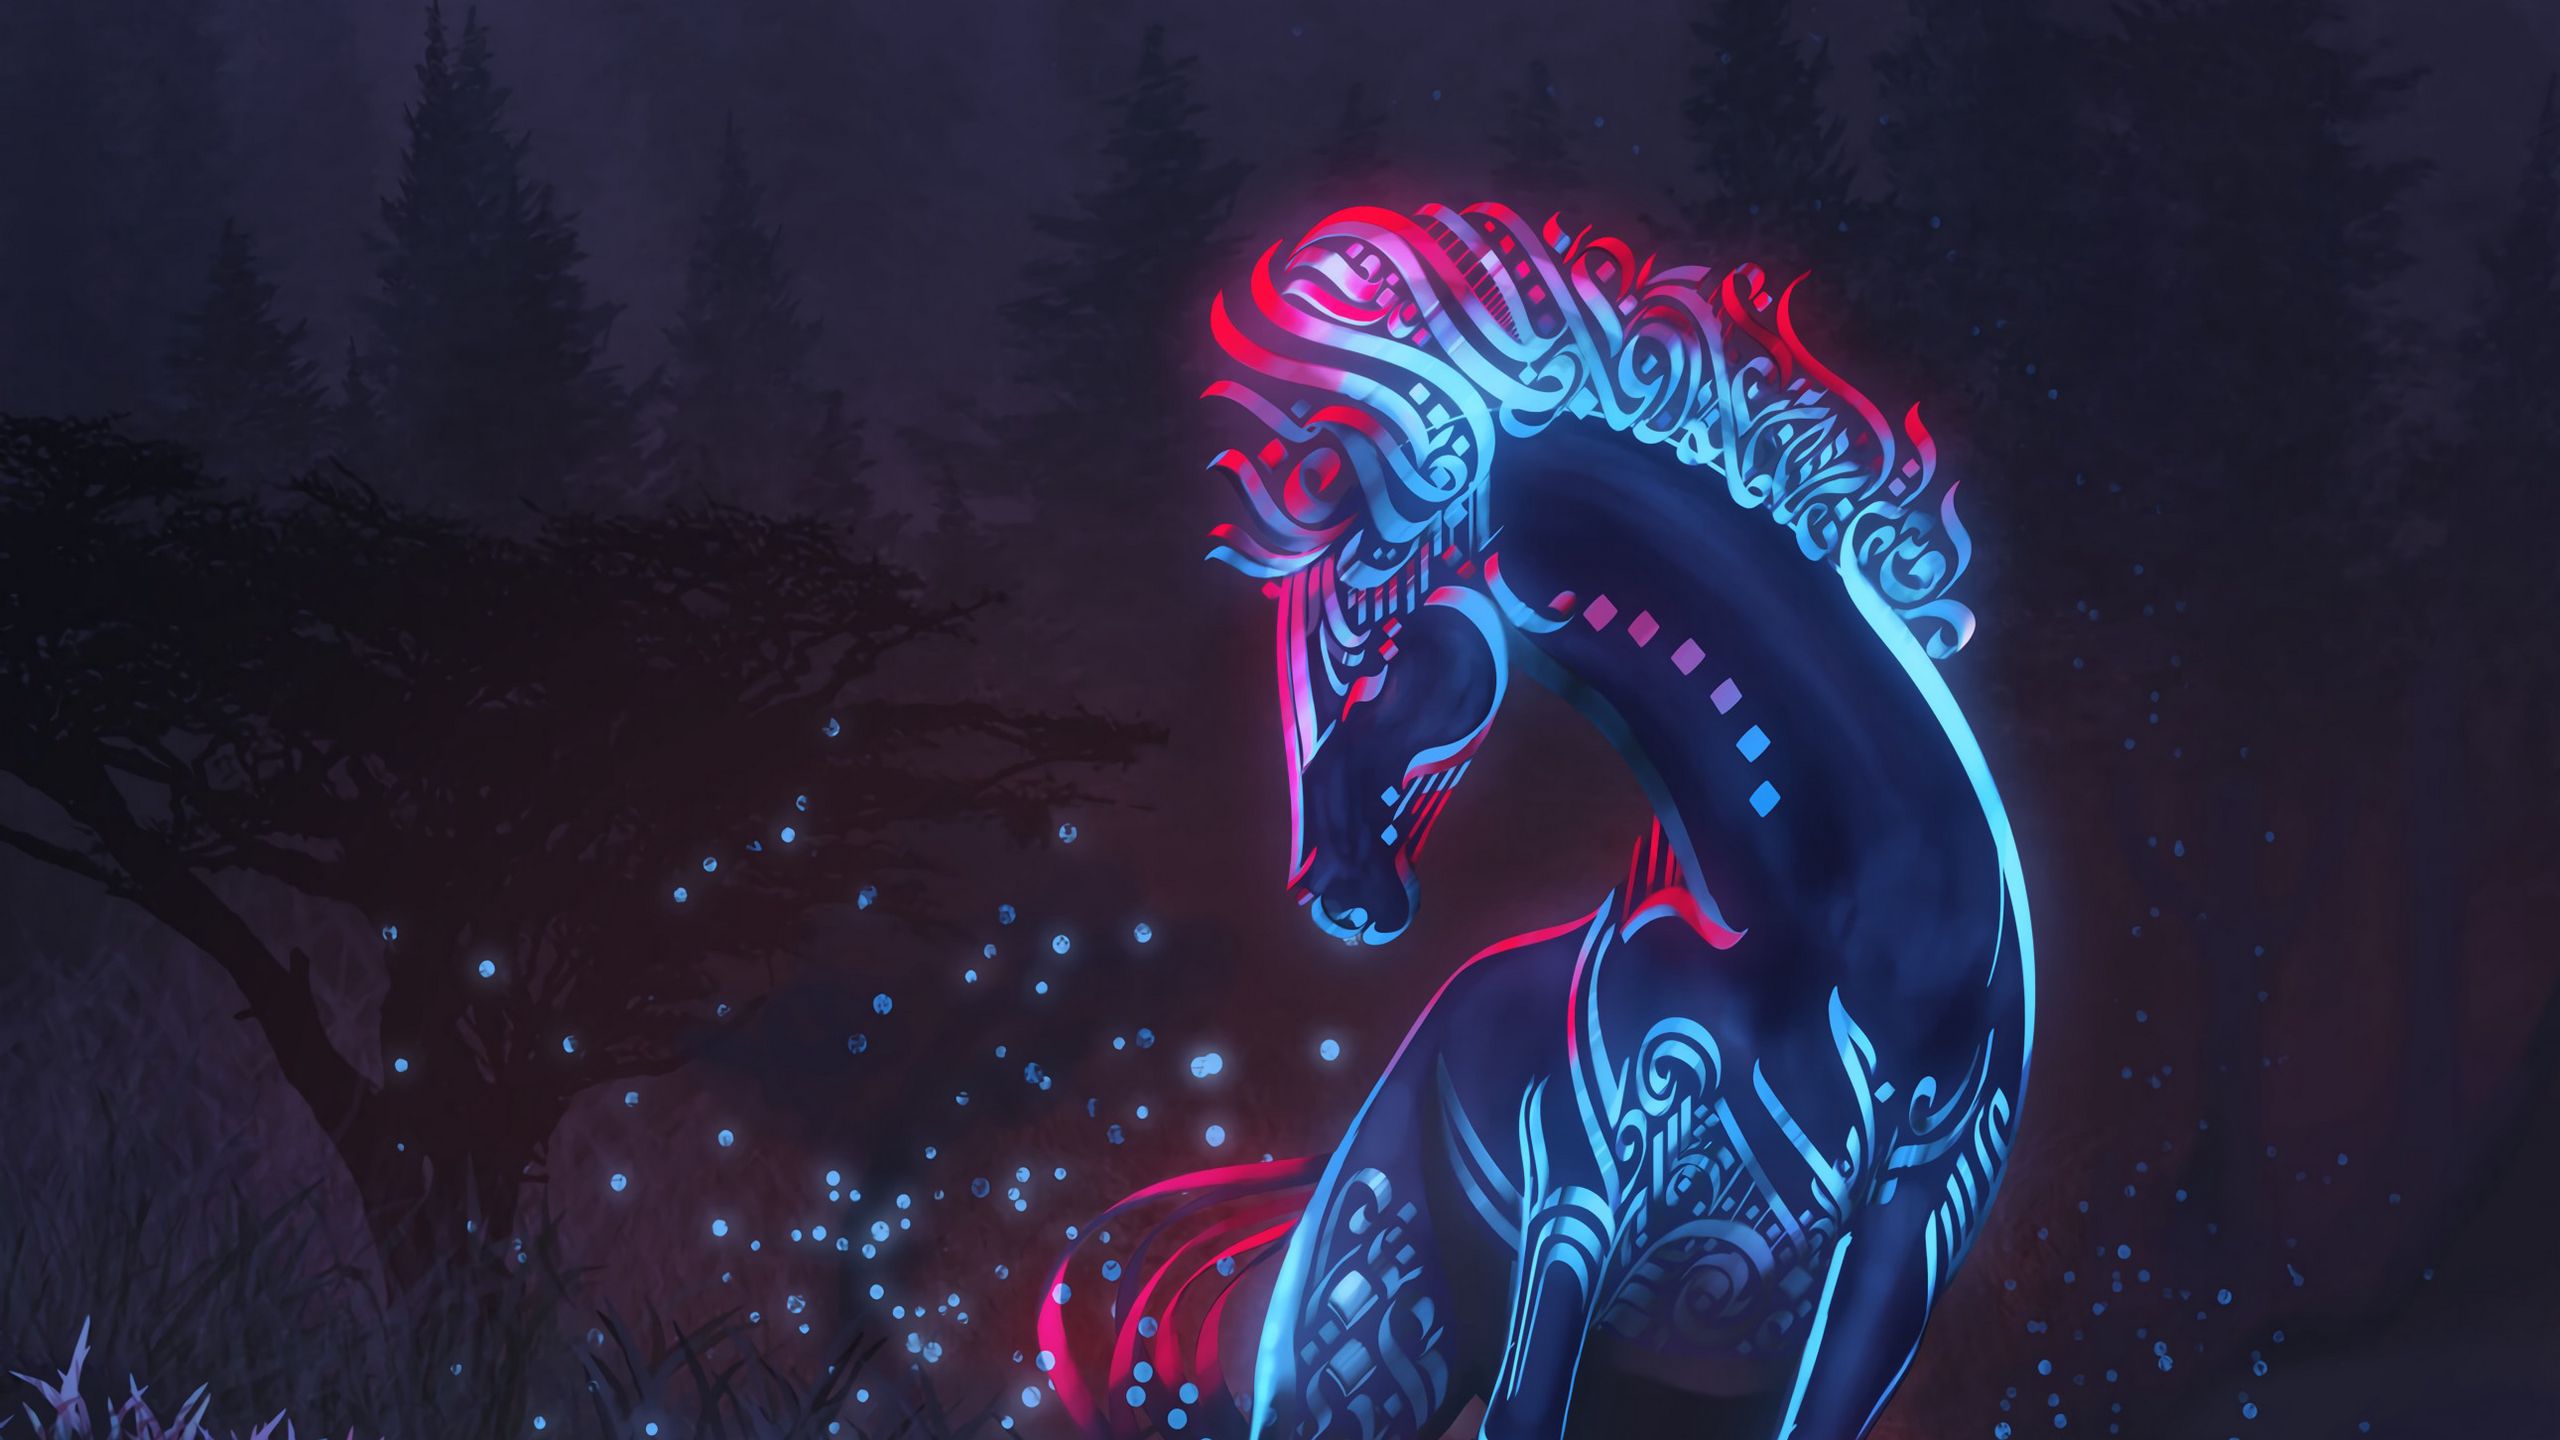 Download wallpaper 2560x1440 horse, fantasy, pattern, particles, art widescreen 16:9 HD background